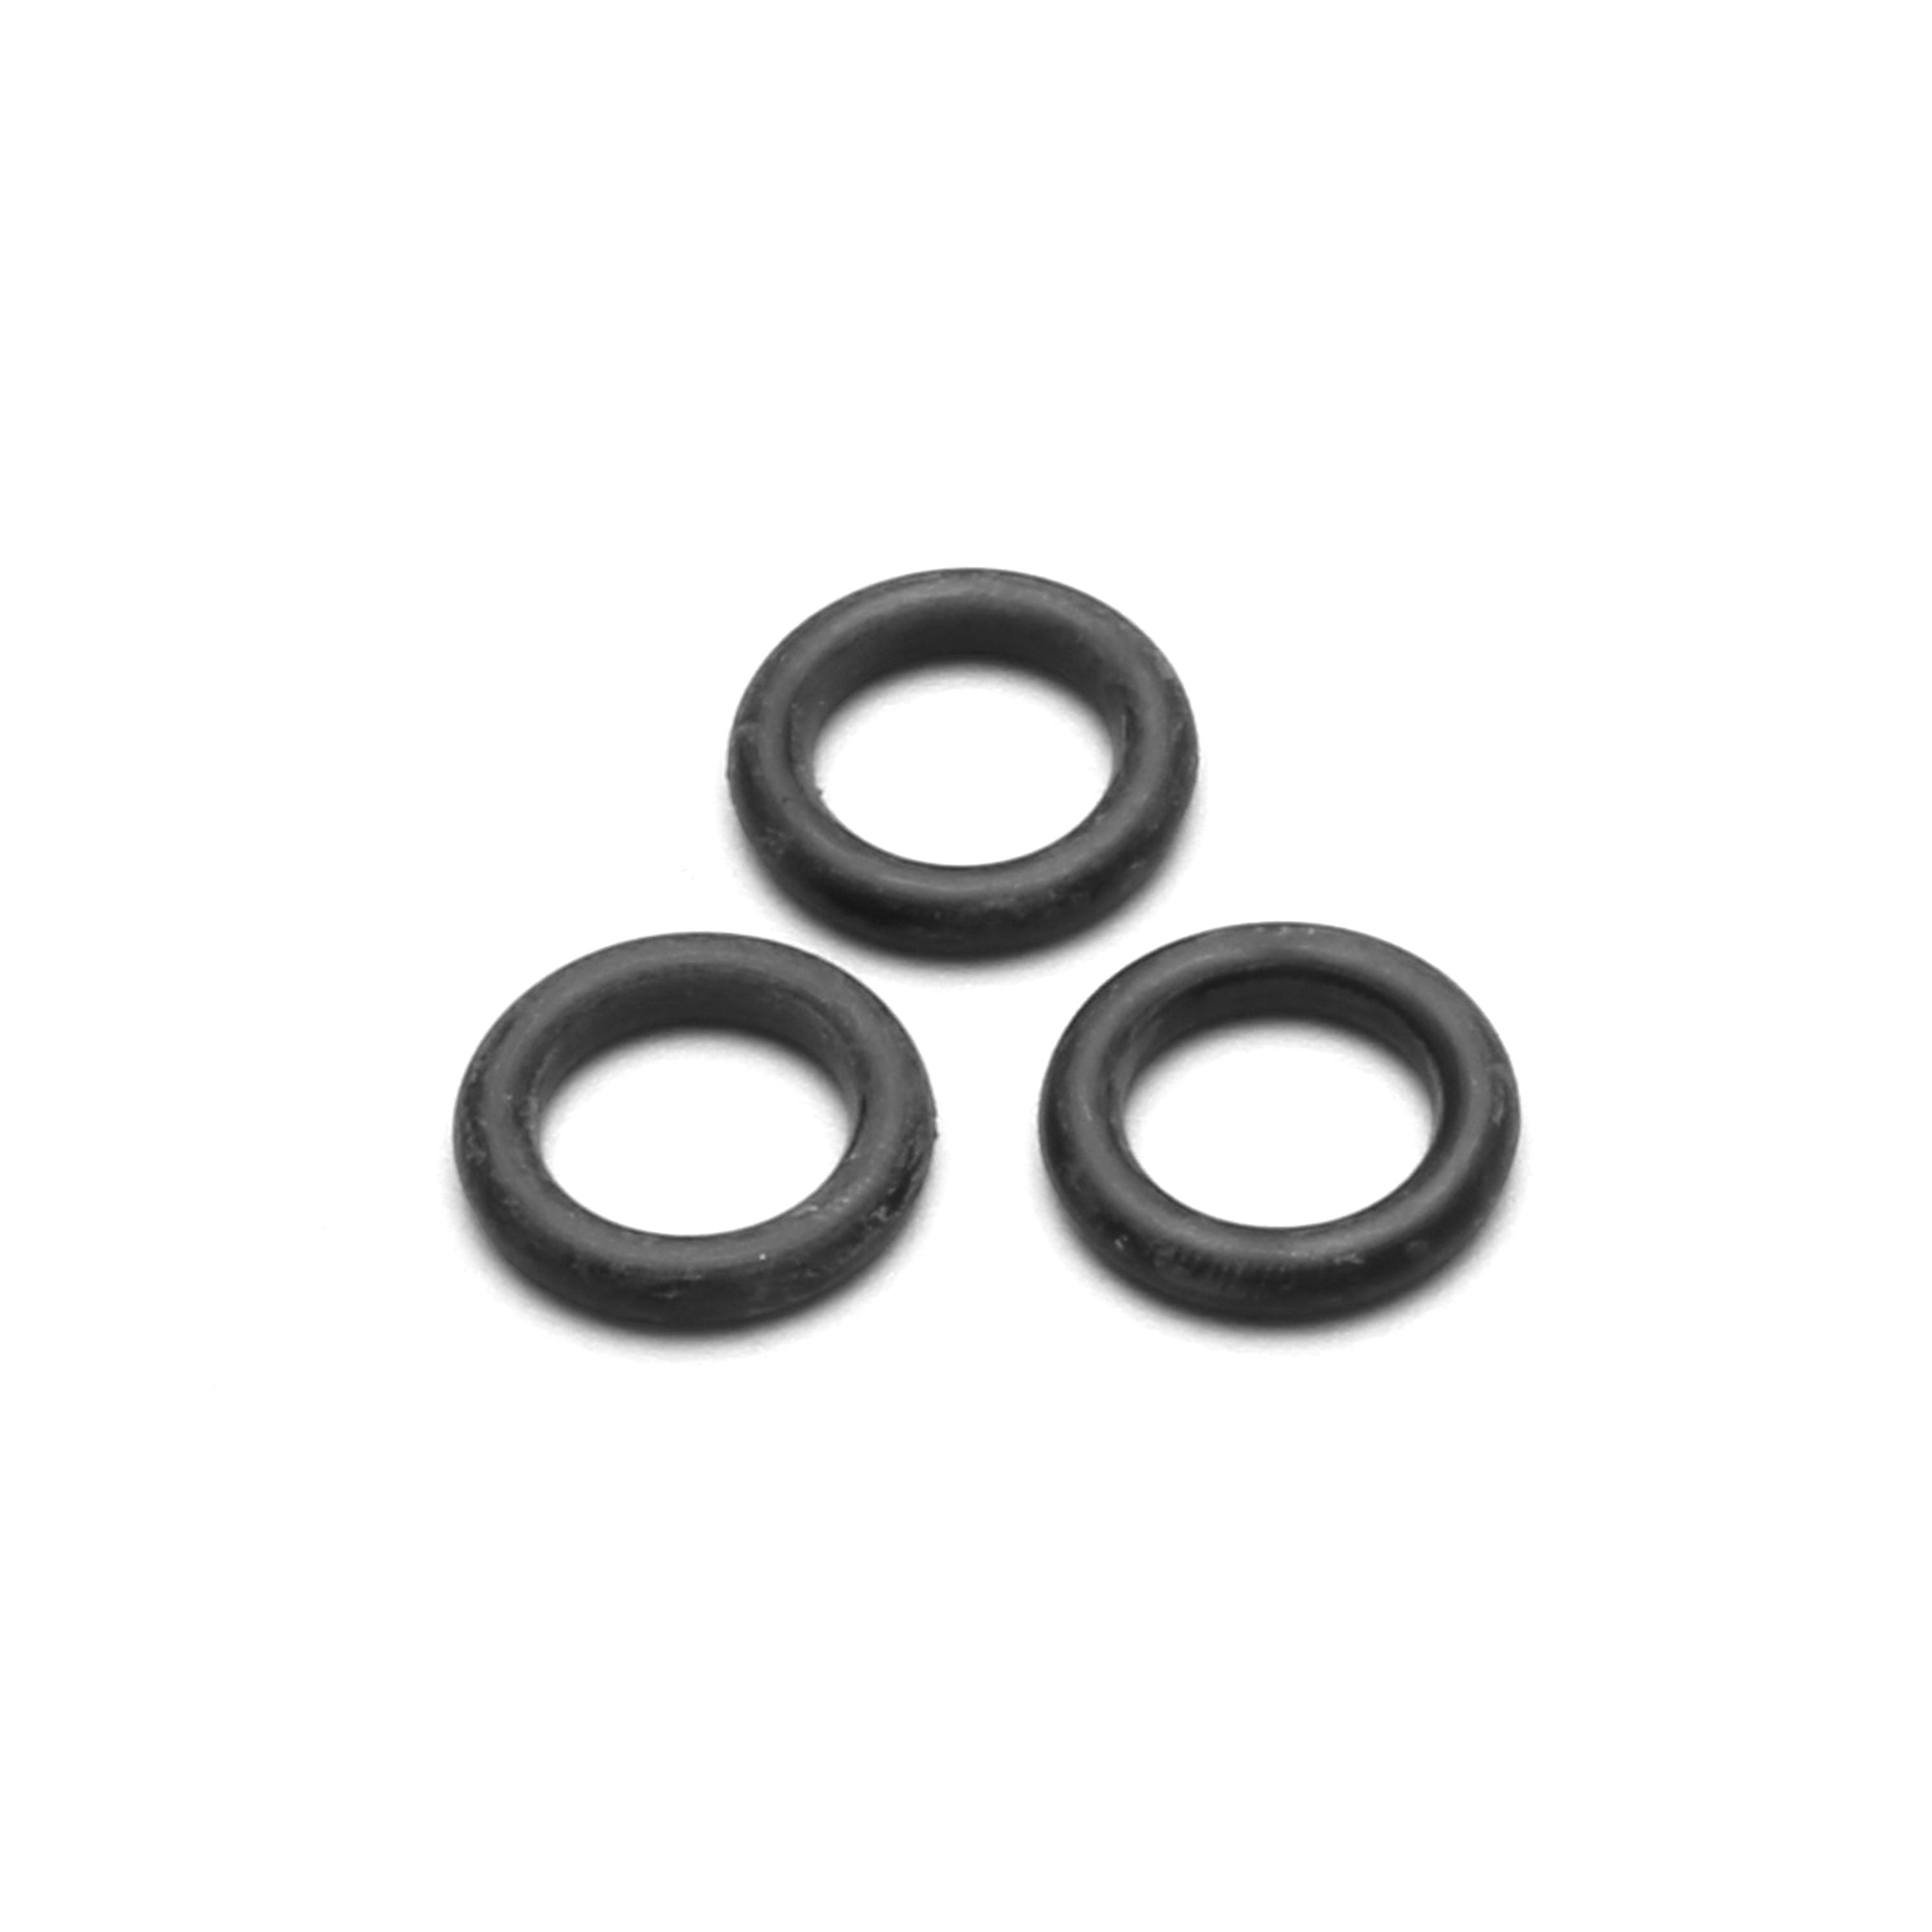 Othmro 50Pcs Nitrile Rubber O-Rings 0.11inch Wire India | Ubuy